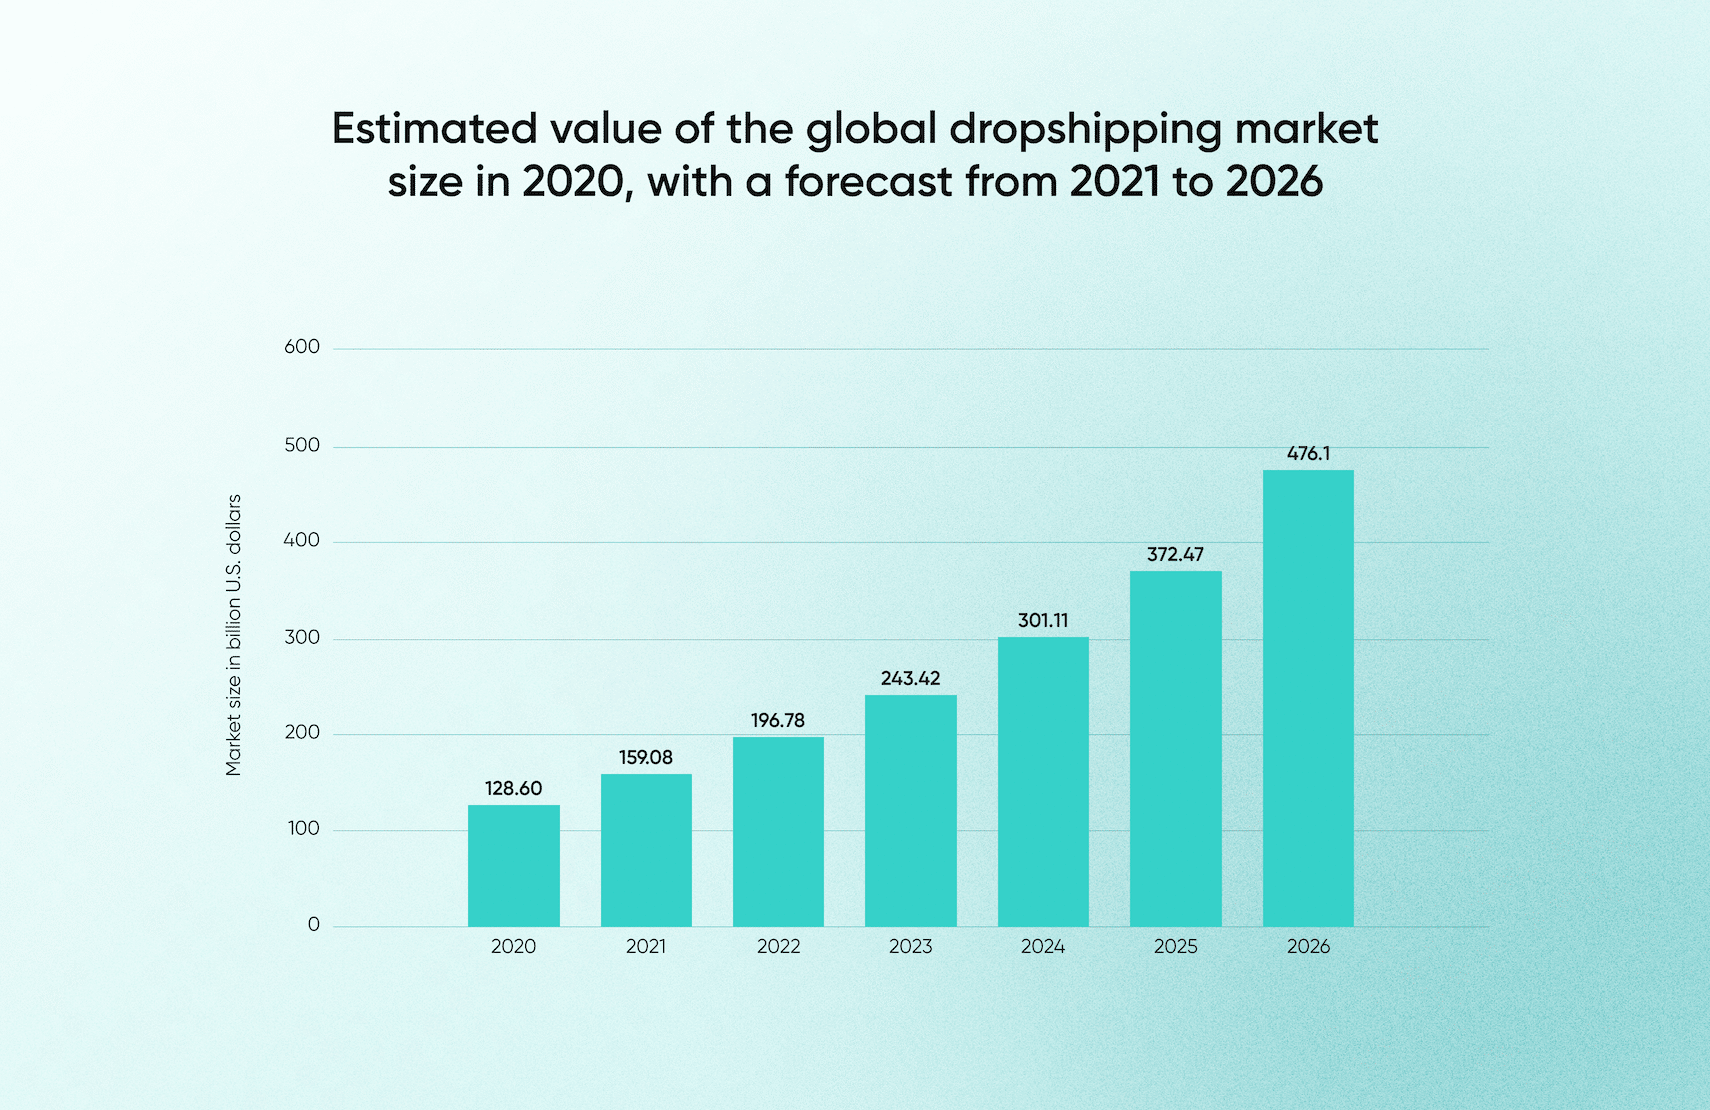 Estimated value of the global dropshipping market size in 2020, with a forecast from 2021 to 2026.